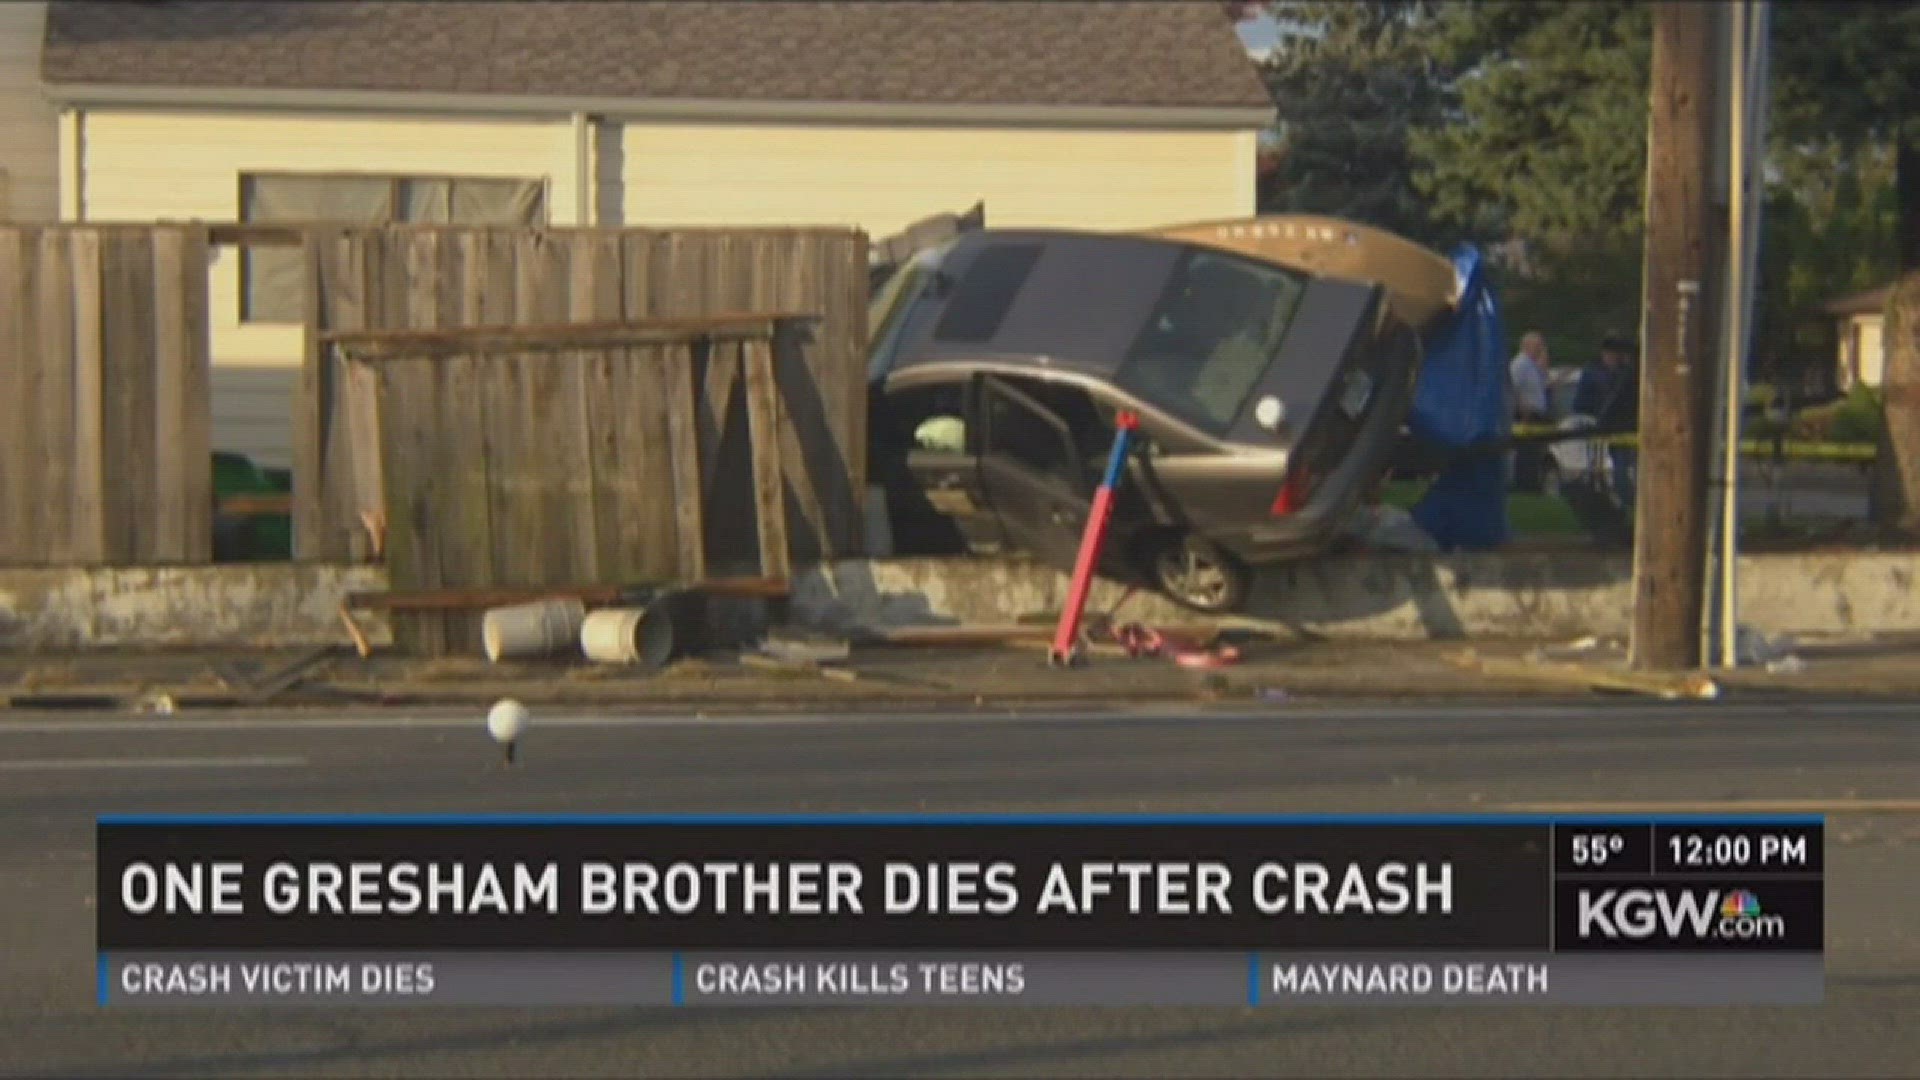 School provides counselors after Gresham brothers struck by car